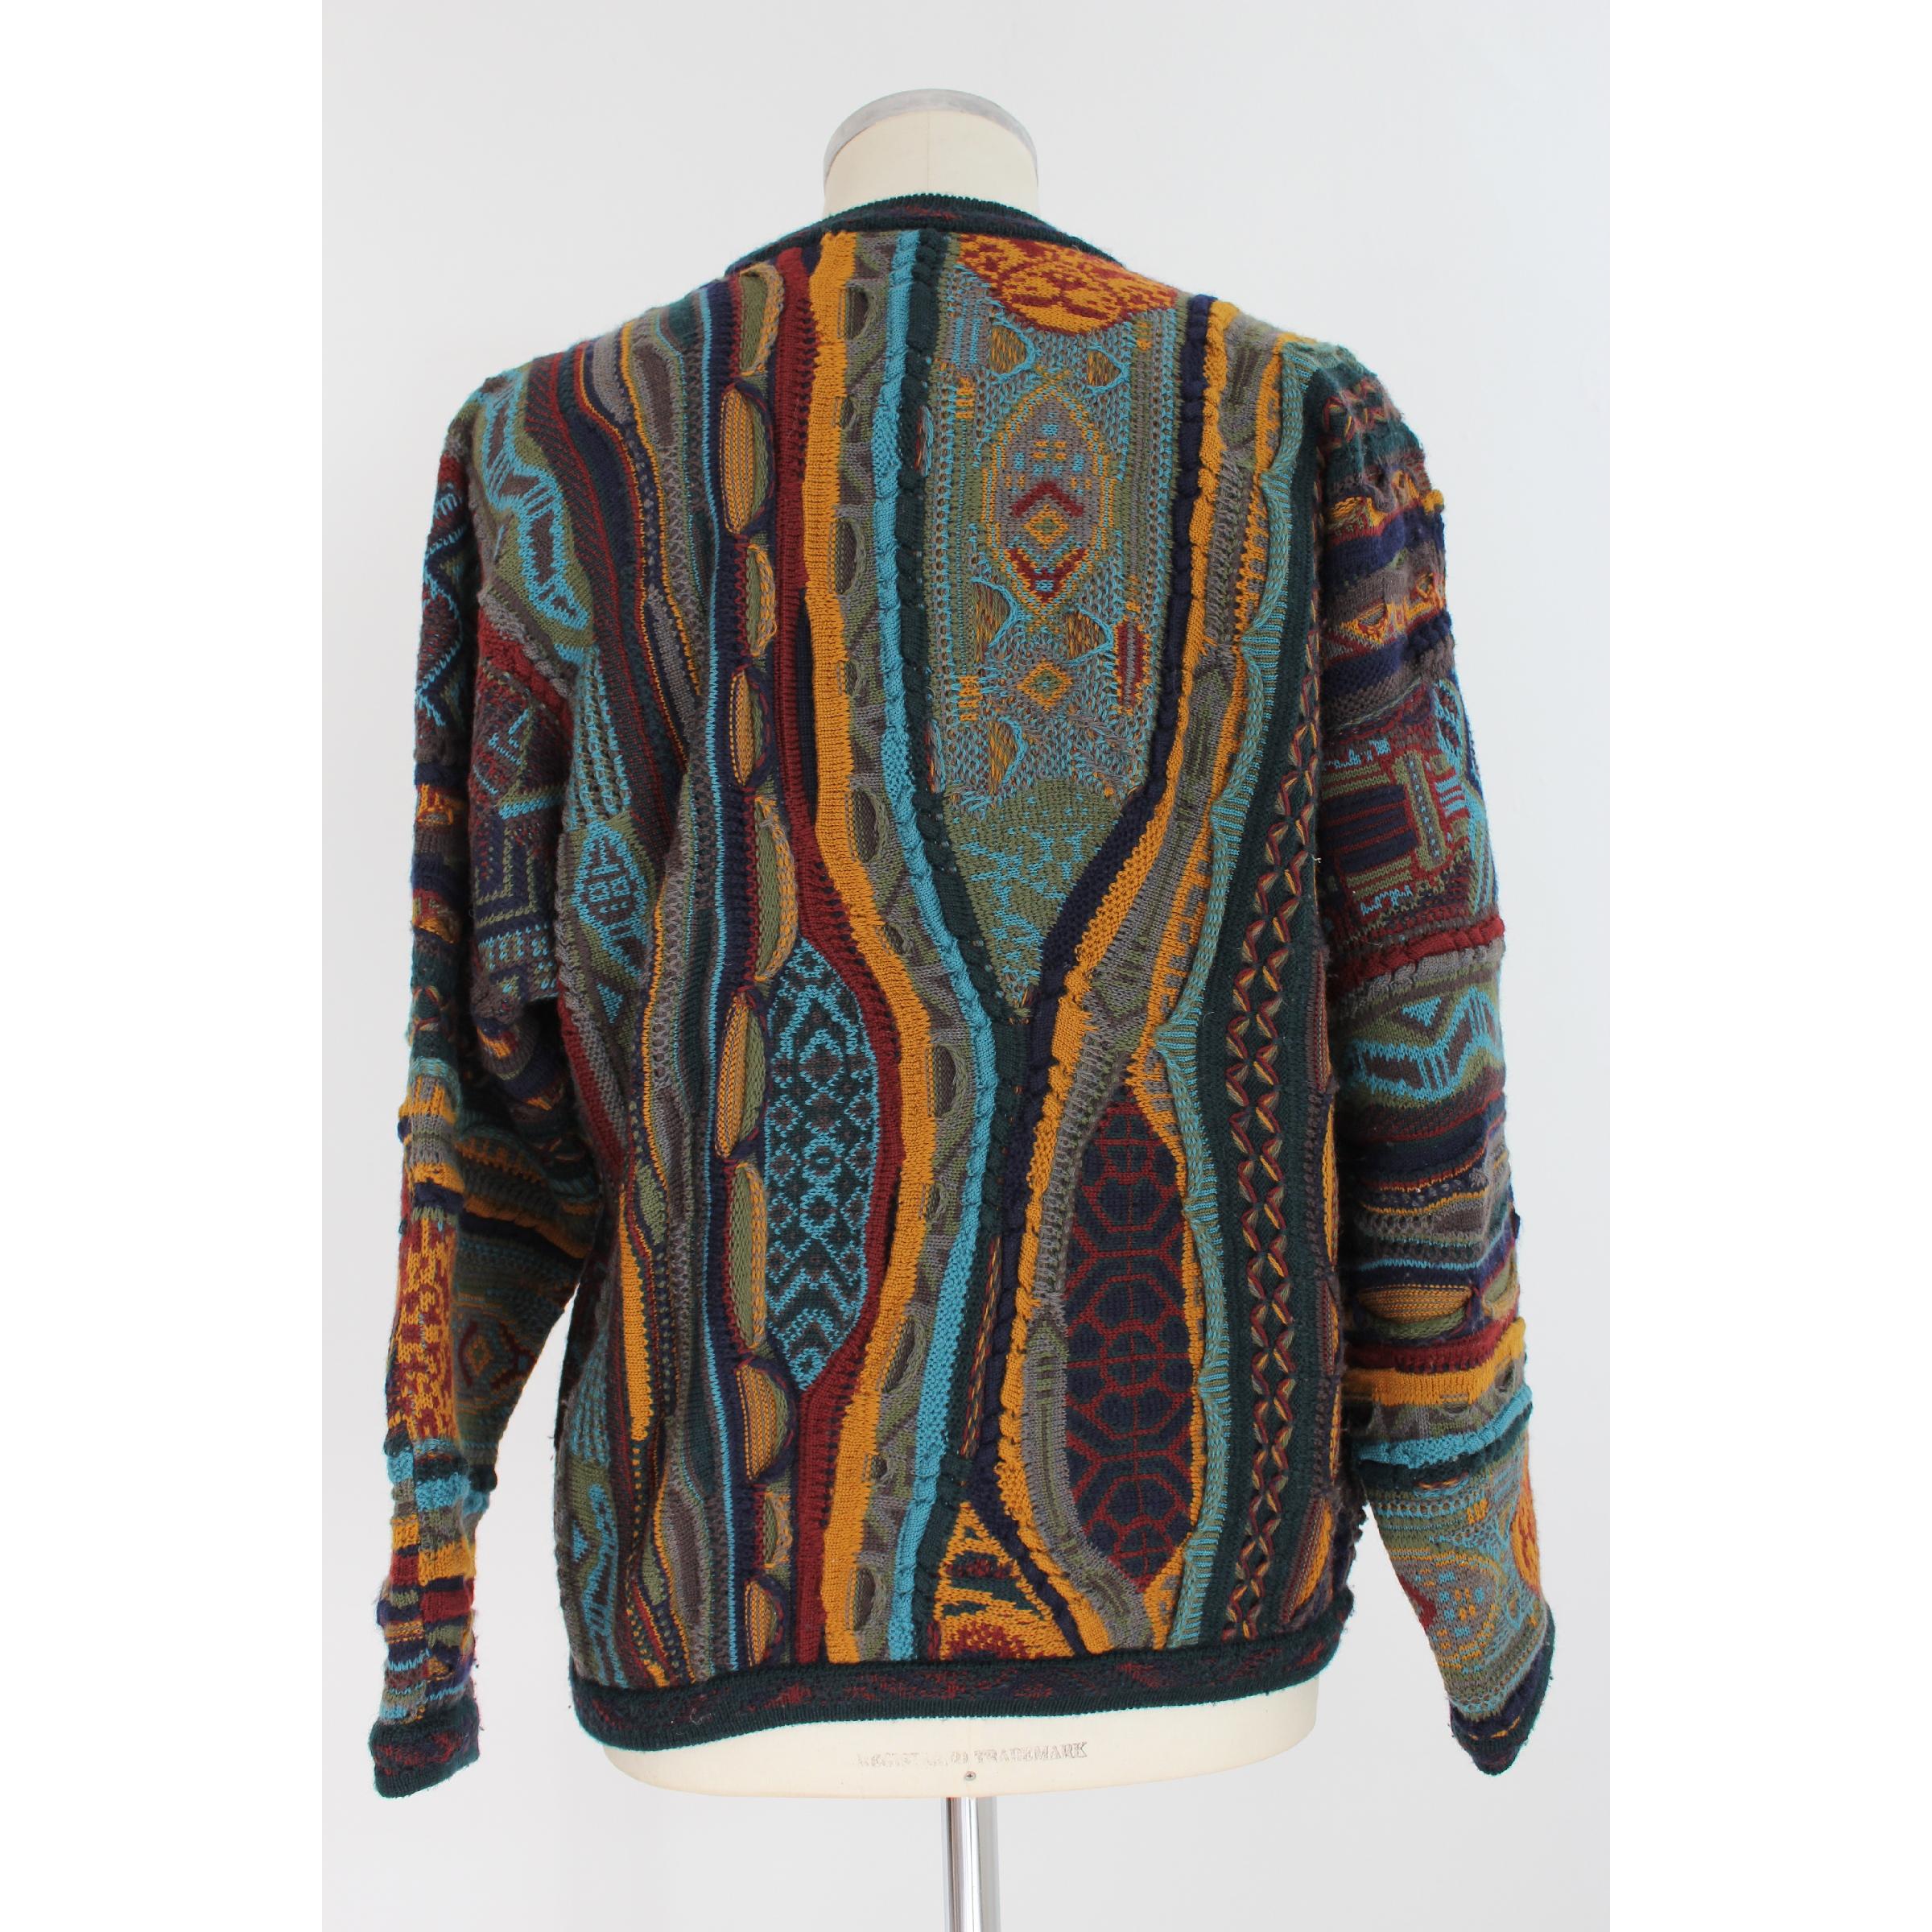 Coogi Australia men's vintage sweater. Multicolored, 100% pure wool. Round neck. Drawings of bull and snake animals. 80s. Made in Australia. Excellent vintage conditions.

Size: 48 It 38 Us 38 Uk

Shoulder: 48 cm
Bust / Chest: 66 cm
Sleeve: 61